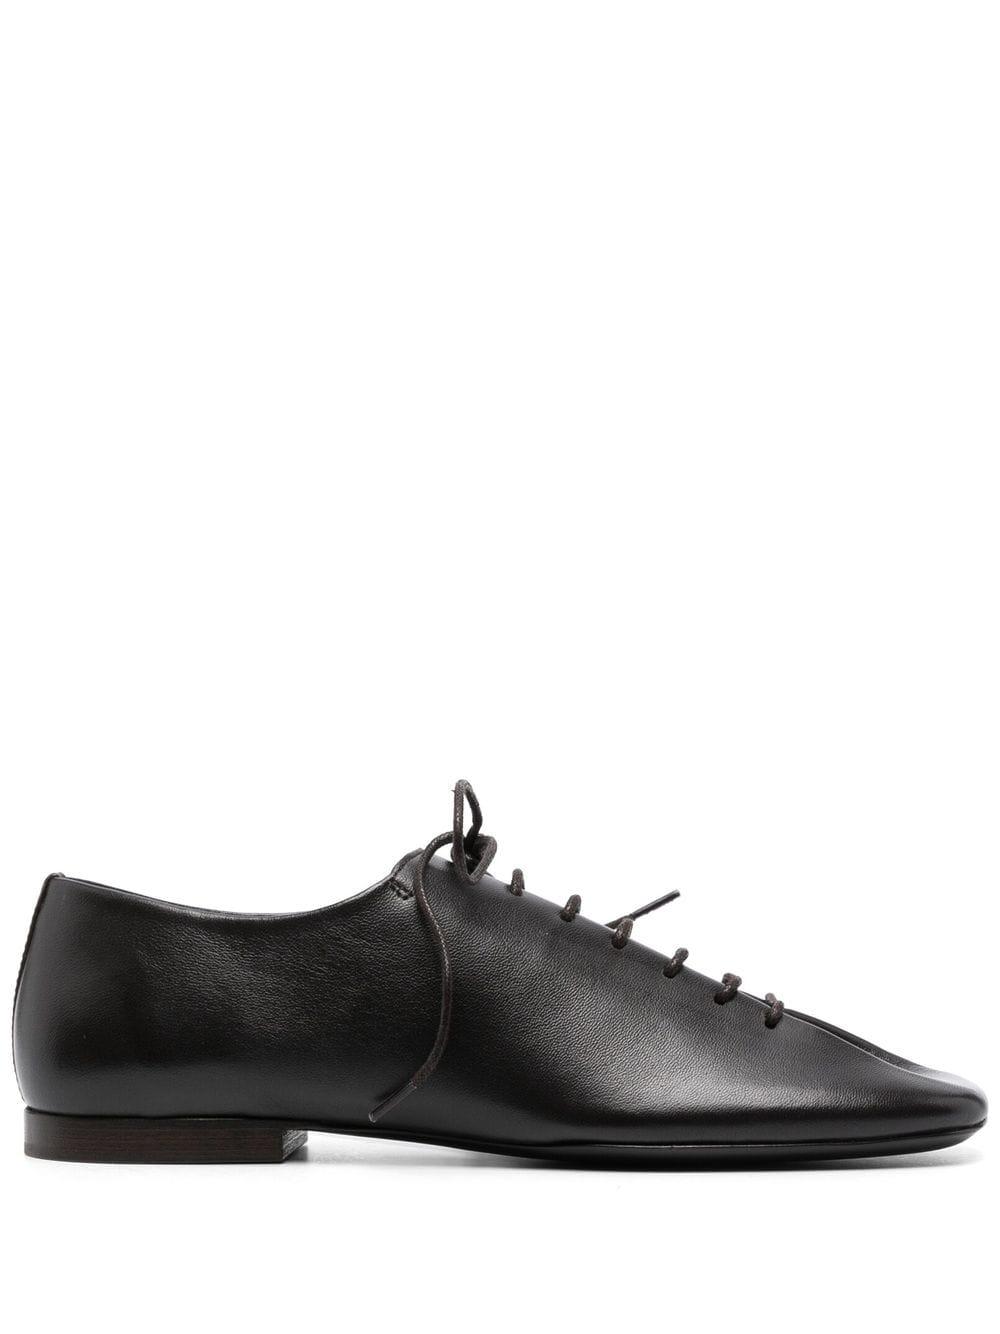 Lemaire Square-toe Derby Shoes in Black | Lyst